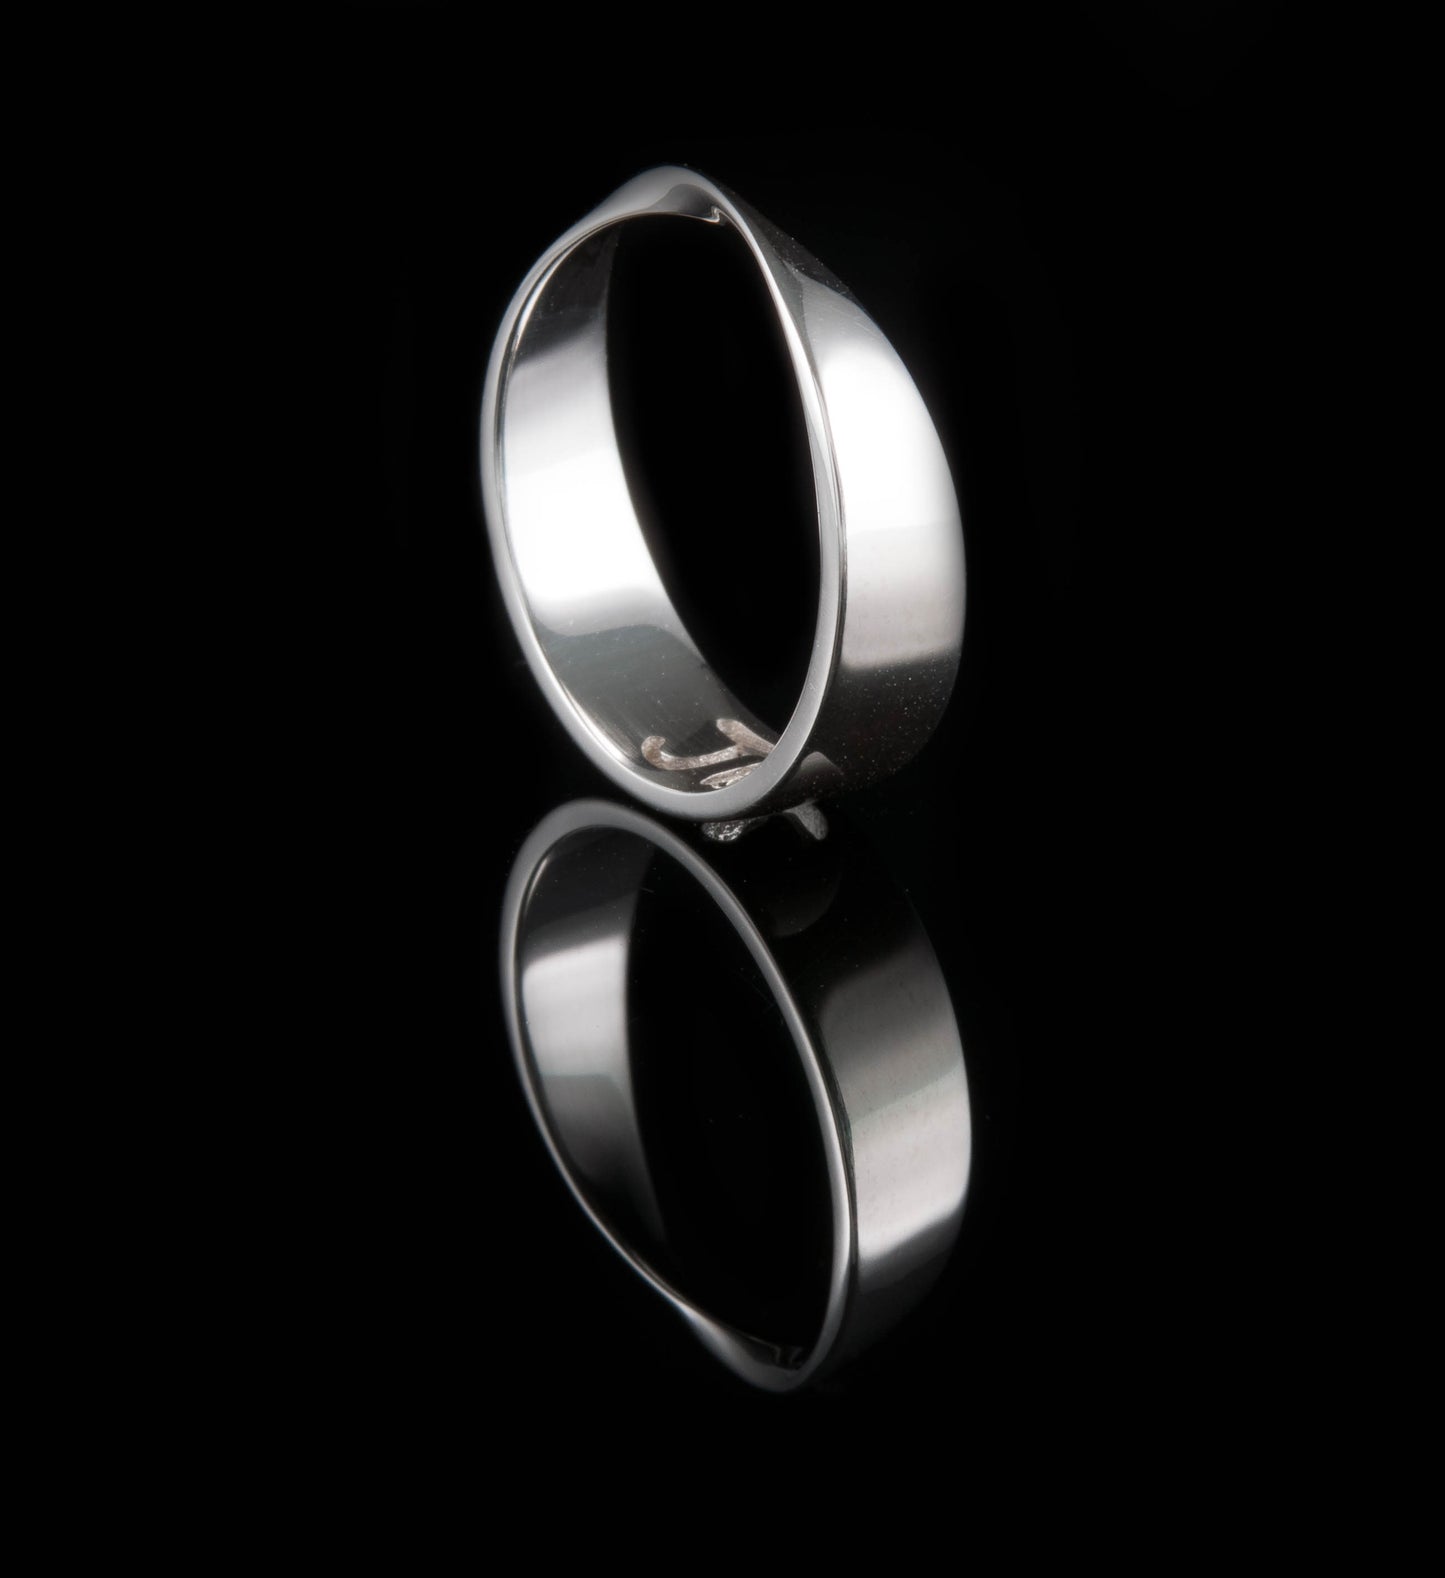 Mobius ring with the Pie symbol cut through the band in the centre point.